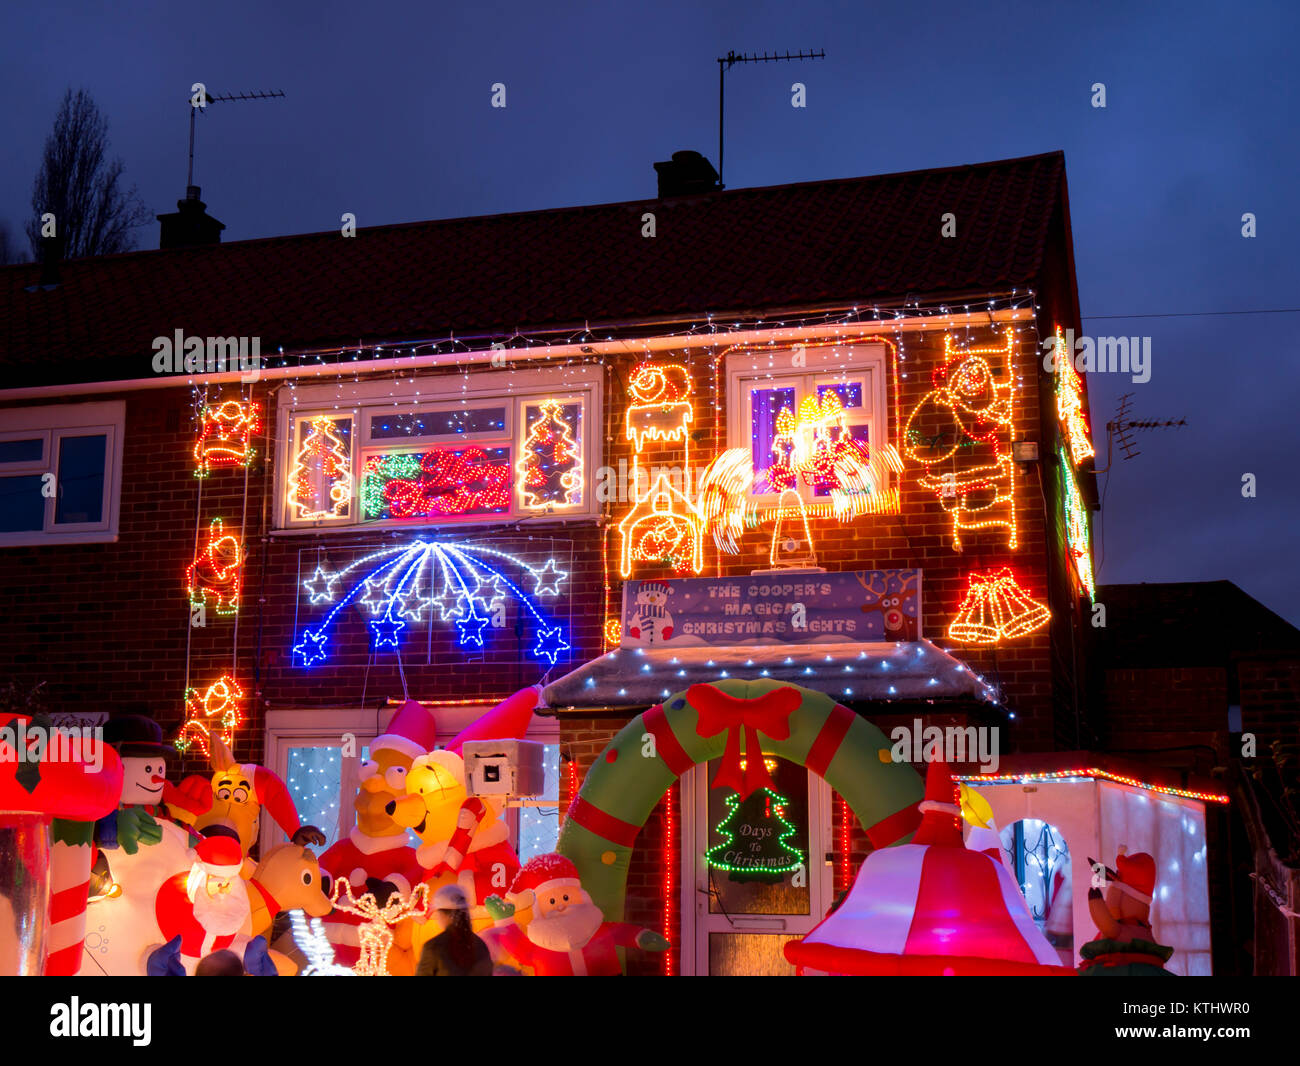 UK, house with excessive Christmas decorations Stock Photo  Alamy